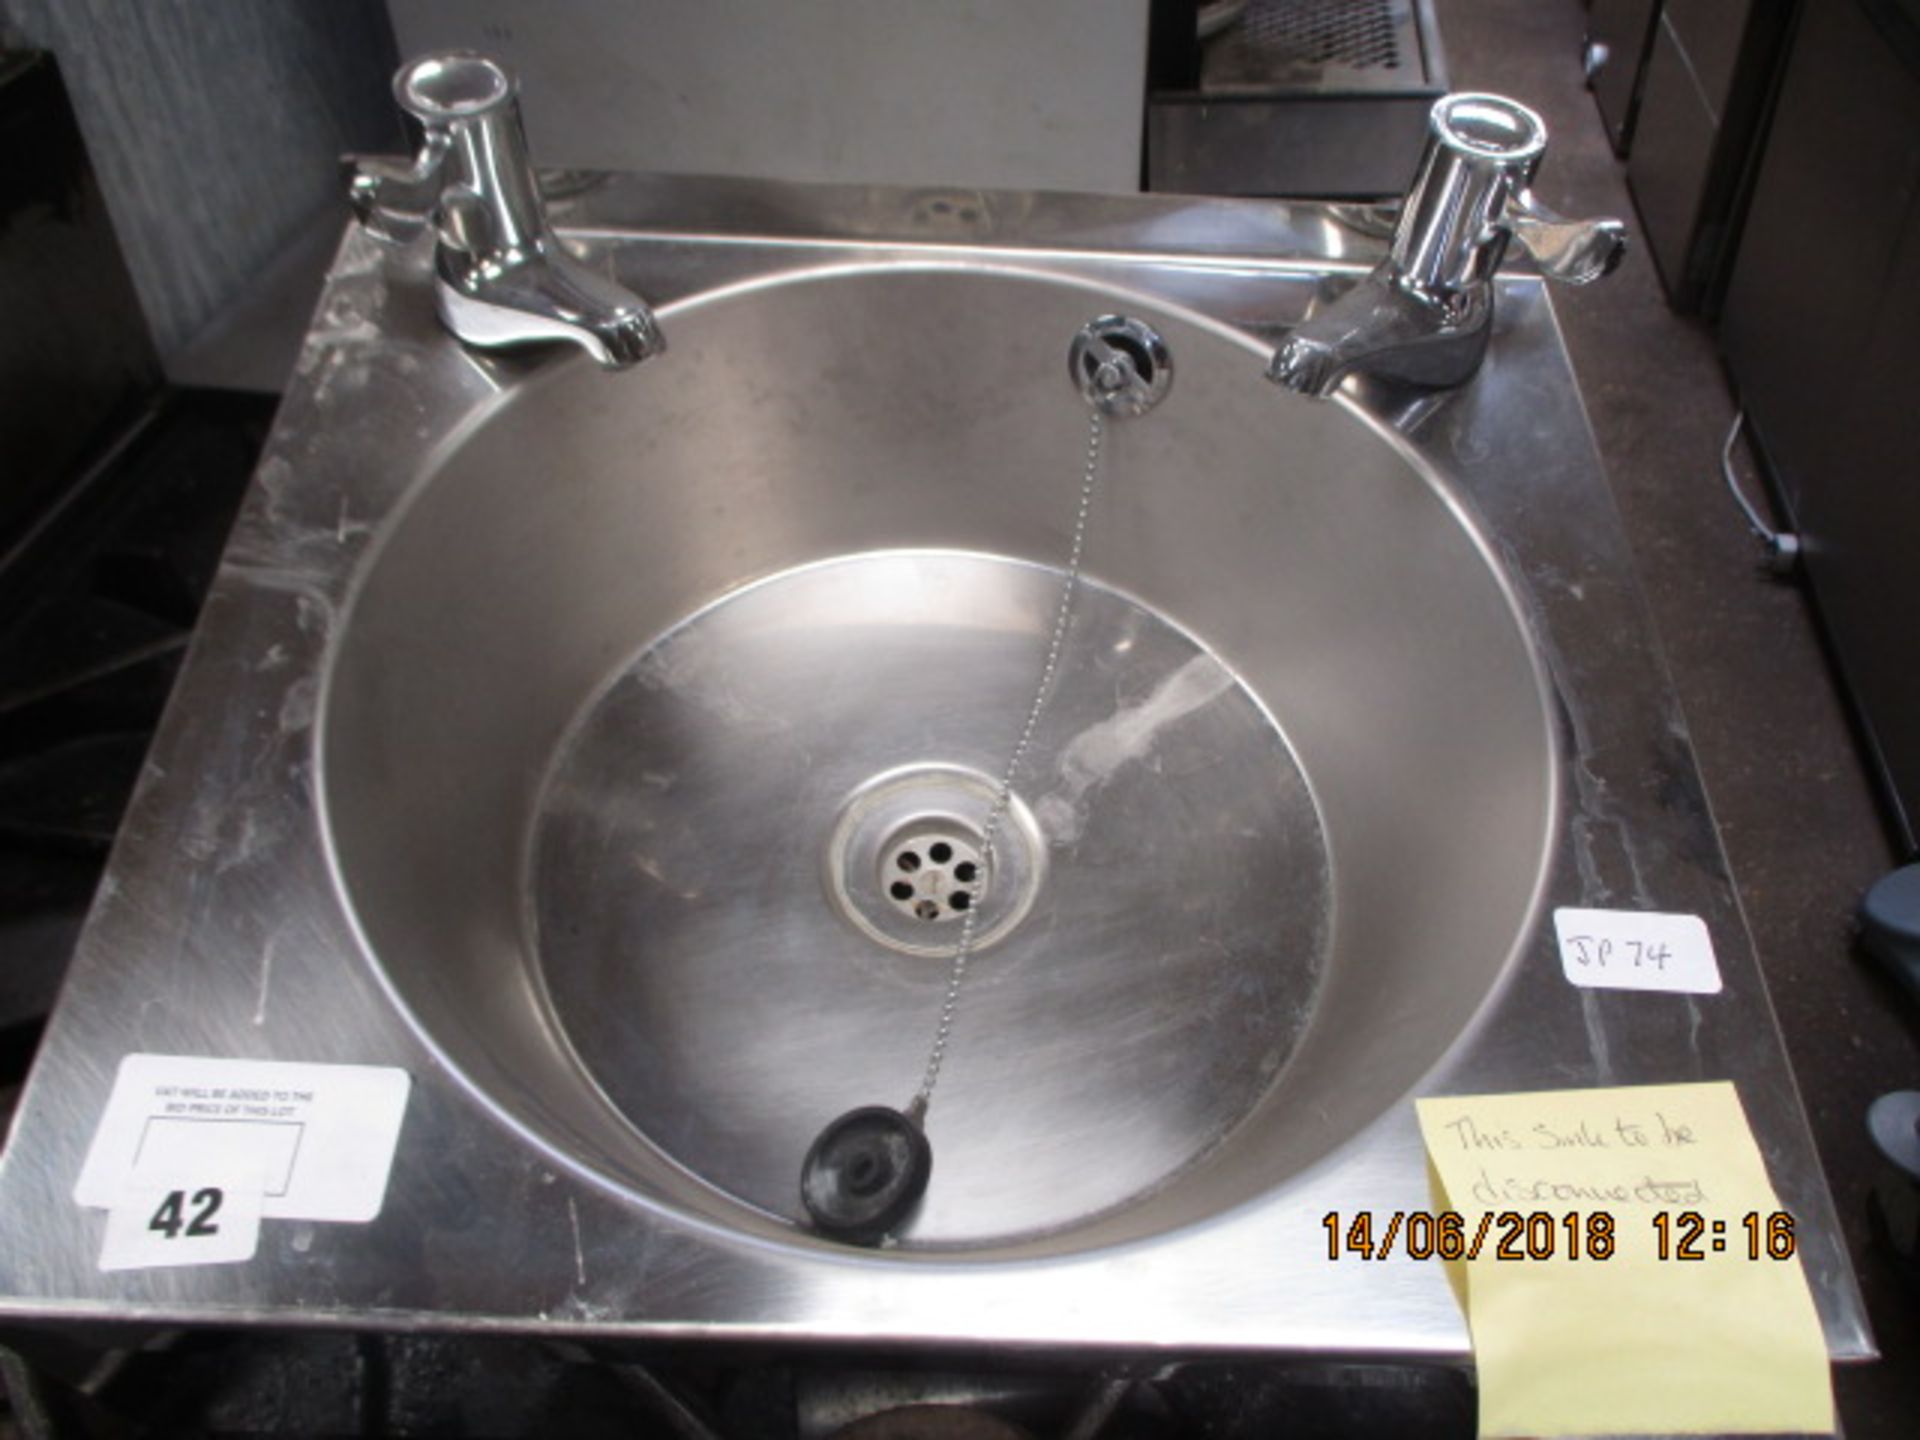 40cm stainless steel hand basin with taps